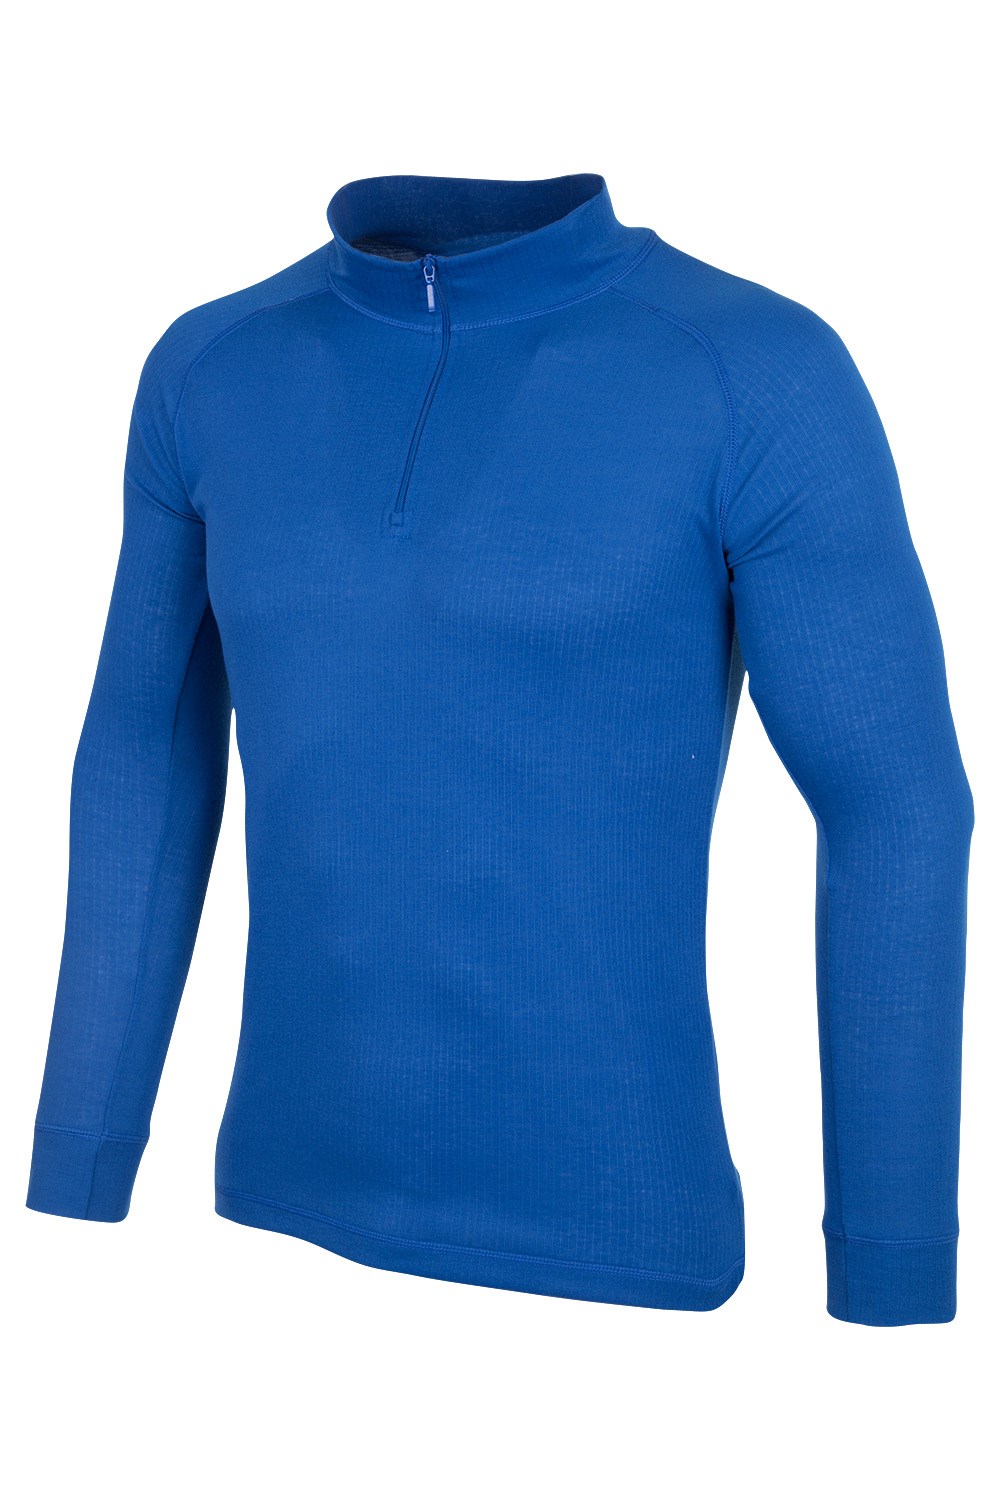 Mountain Warehouse Mountain Warehouse Mens  Contrast Talus Long Sleeved Round Neck Baselayer Top In 